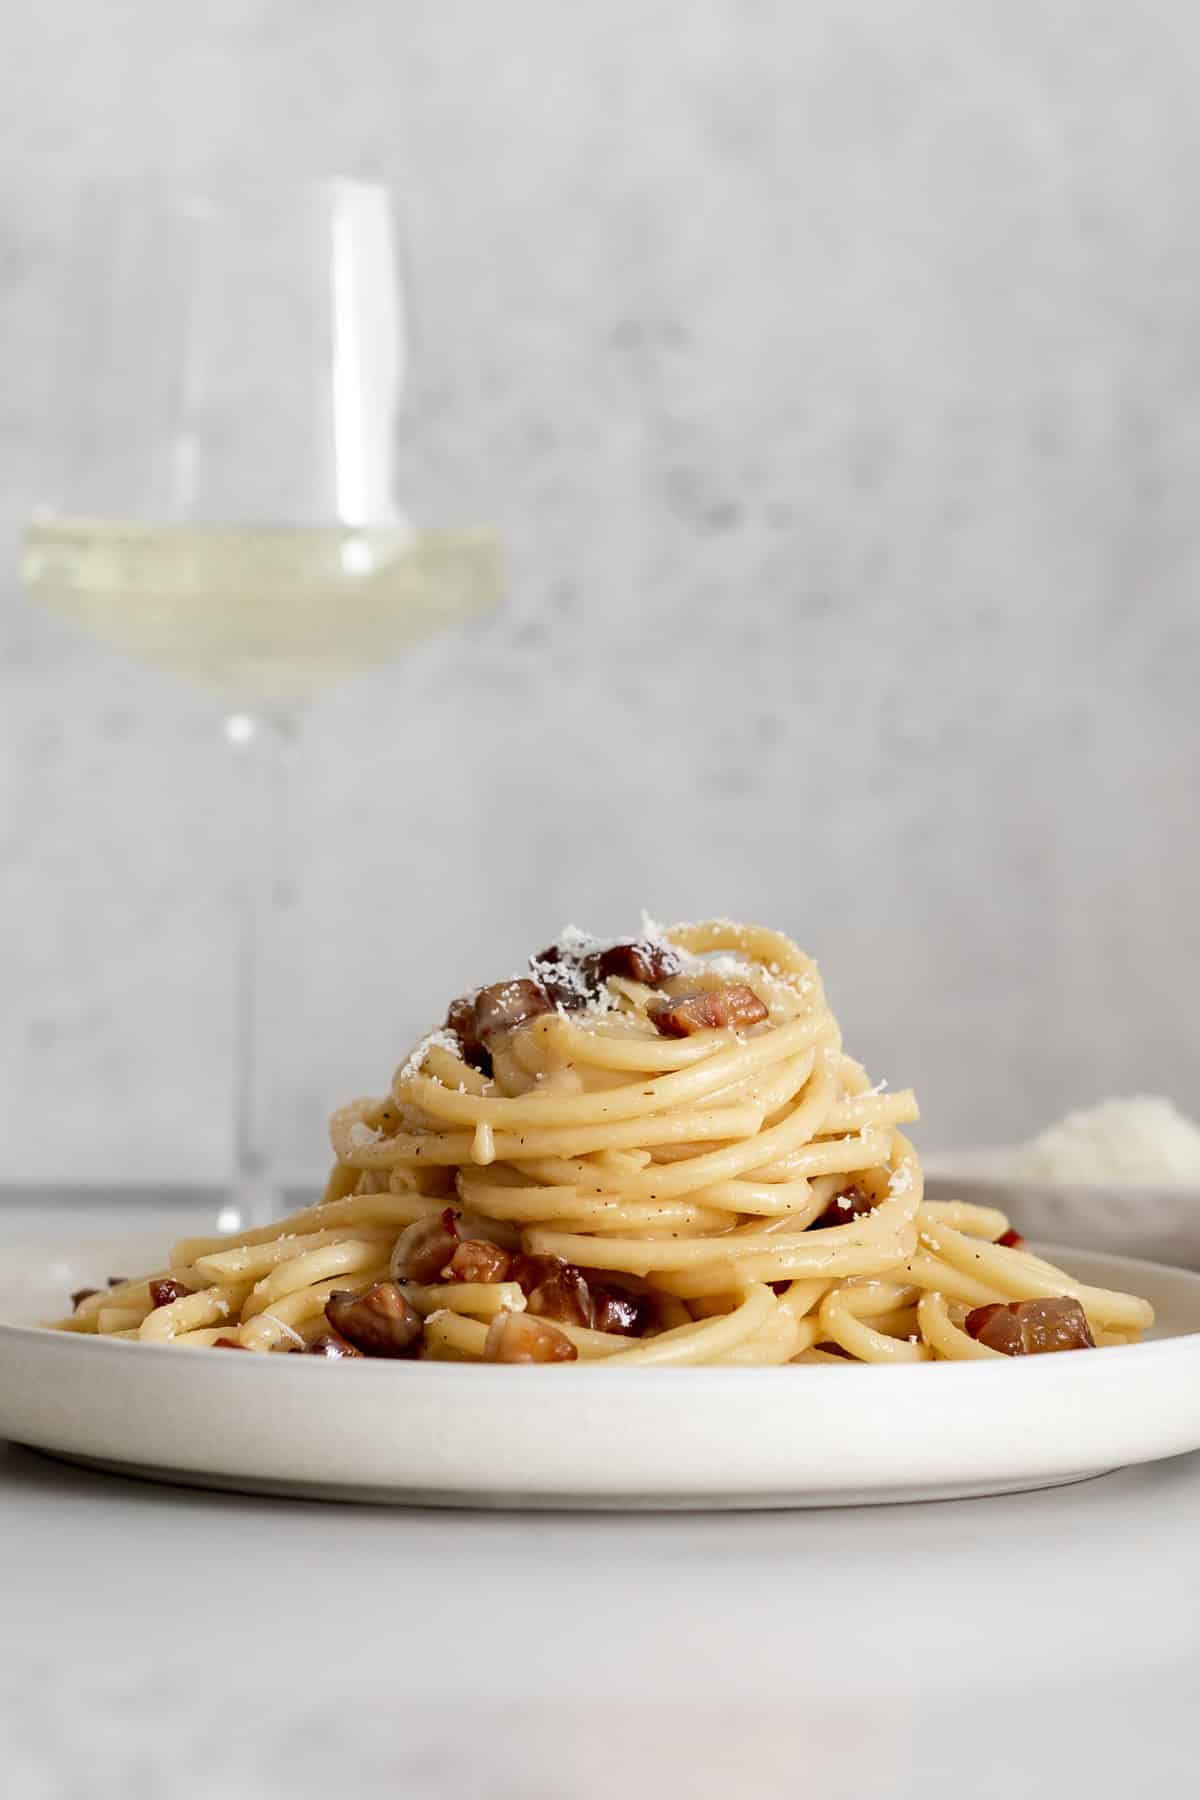 pile of carbonara on a plate with a glass of white wine.